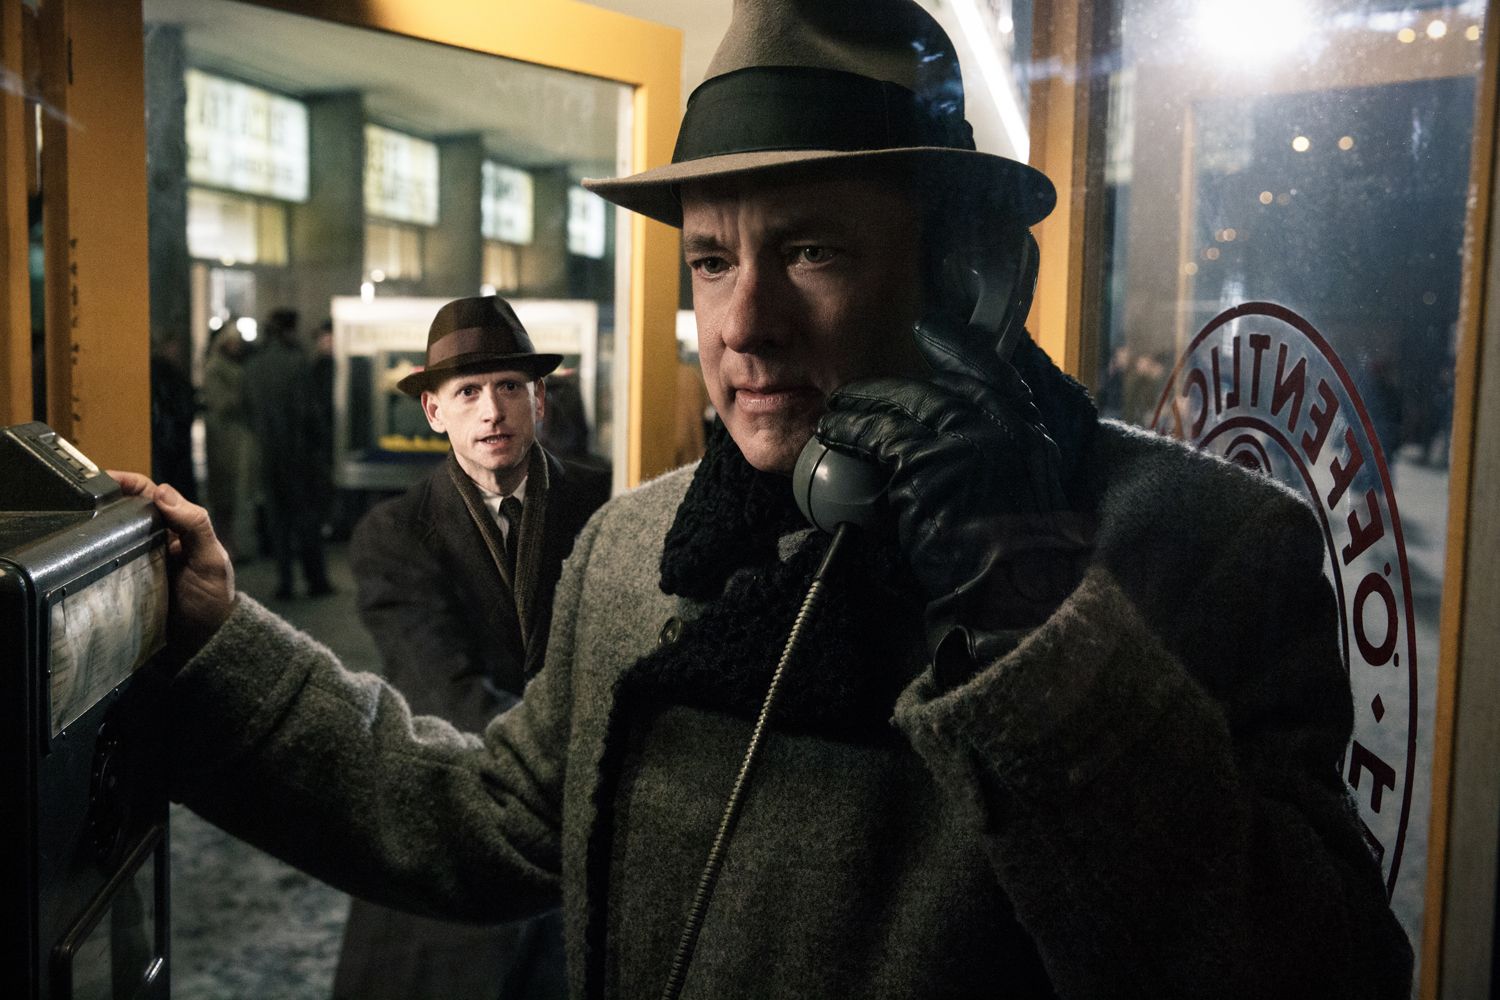 Brooklyn lawyer James Donovan (Tom Hanks) is an ordinary man placed in extraordinary circumstances in DreamWorks Pictures/Fox 2000 Pictures' dramatic thriller BRIDGE OF SPIES, directed by Steven Spielberg.